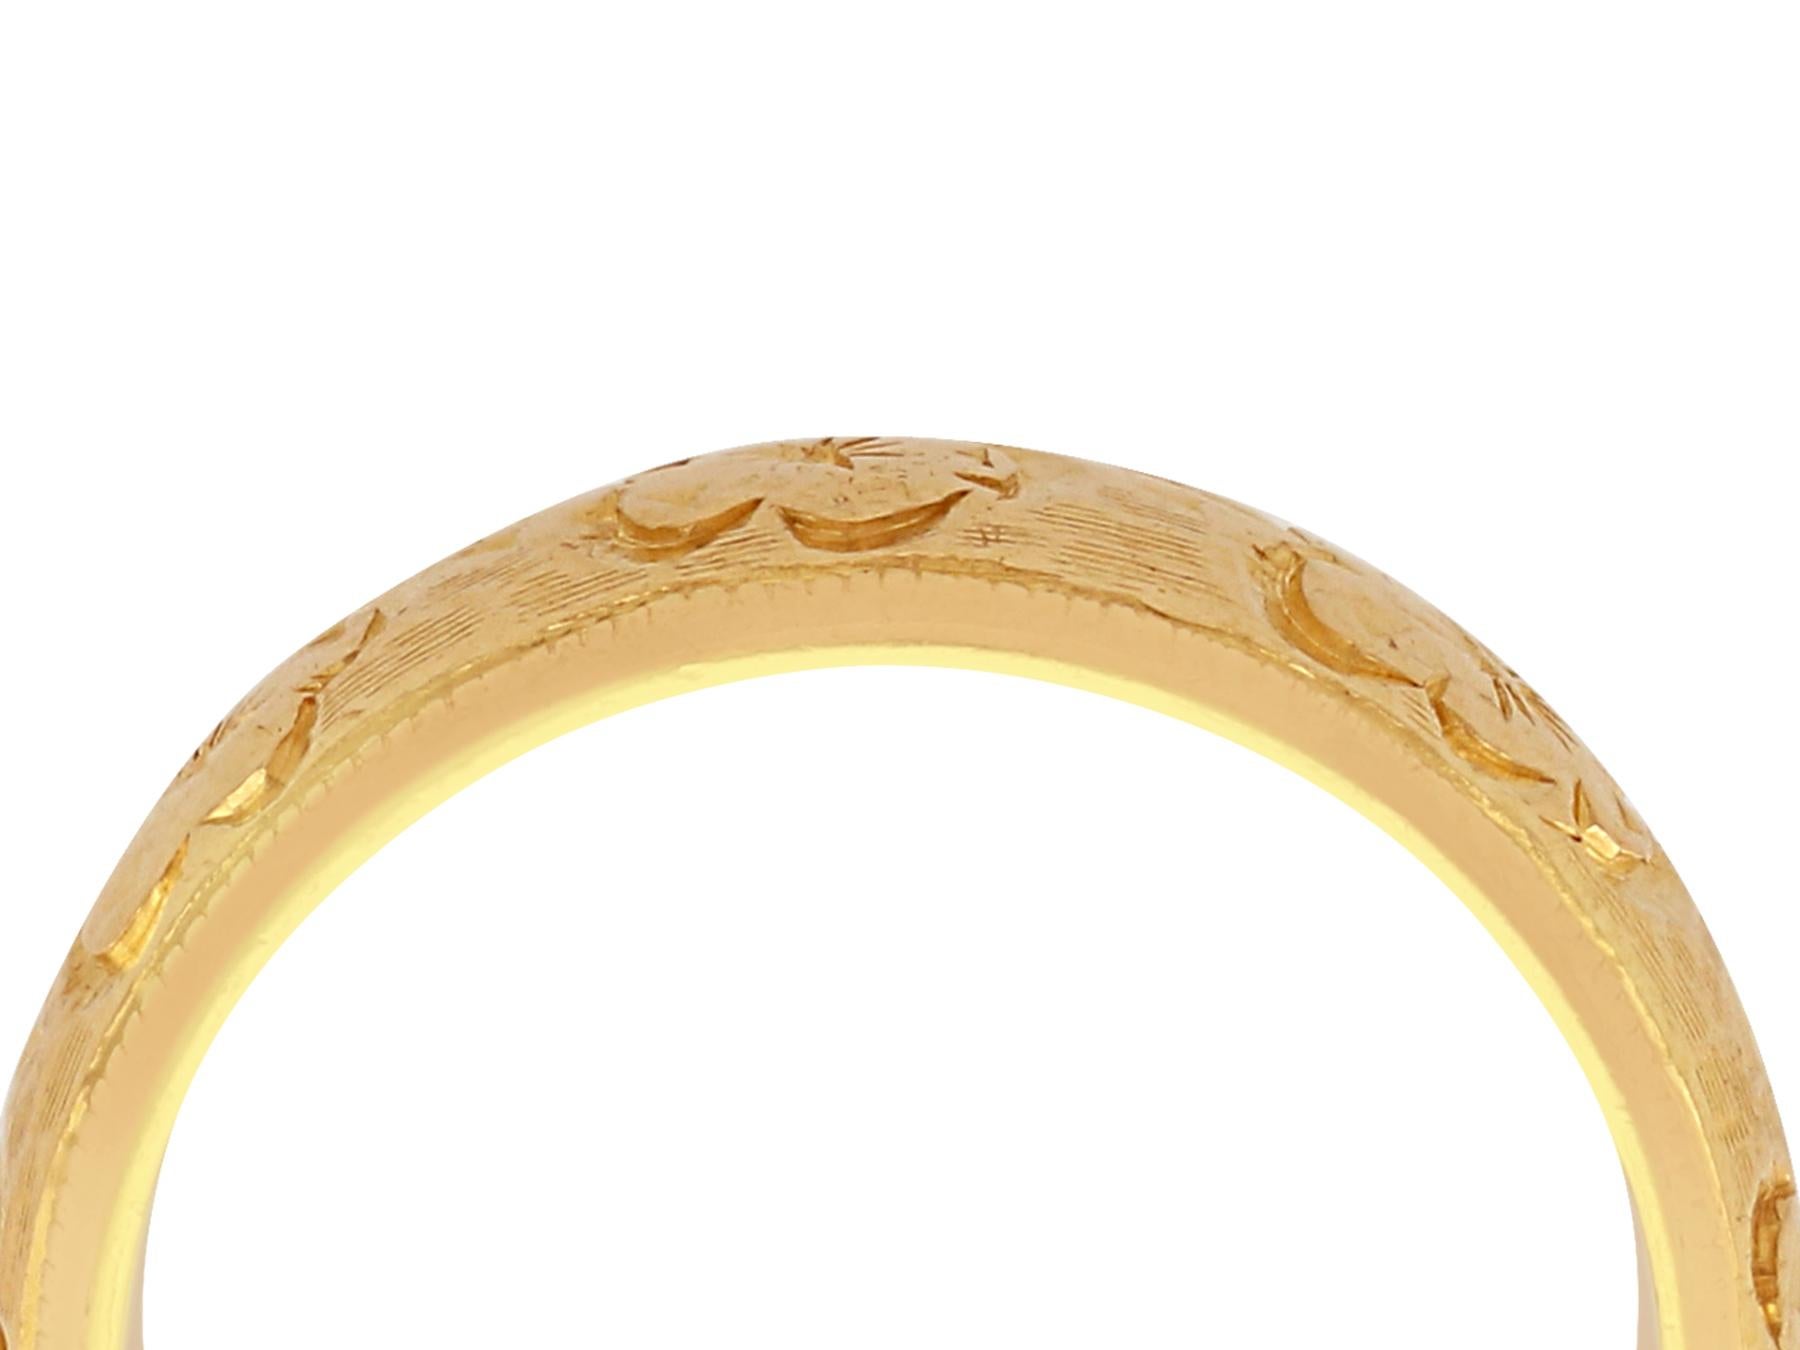 A fine and impressive 22 karat yellow gold, chased decorated wedding band; part of our diverse vintage jewelry and estate jewelry collections

This fine and impressive vintage wedding band has been crated in 22k yellow gold.

The outer surface of